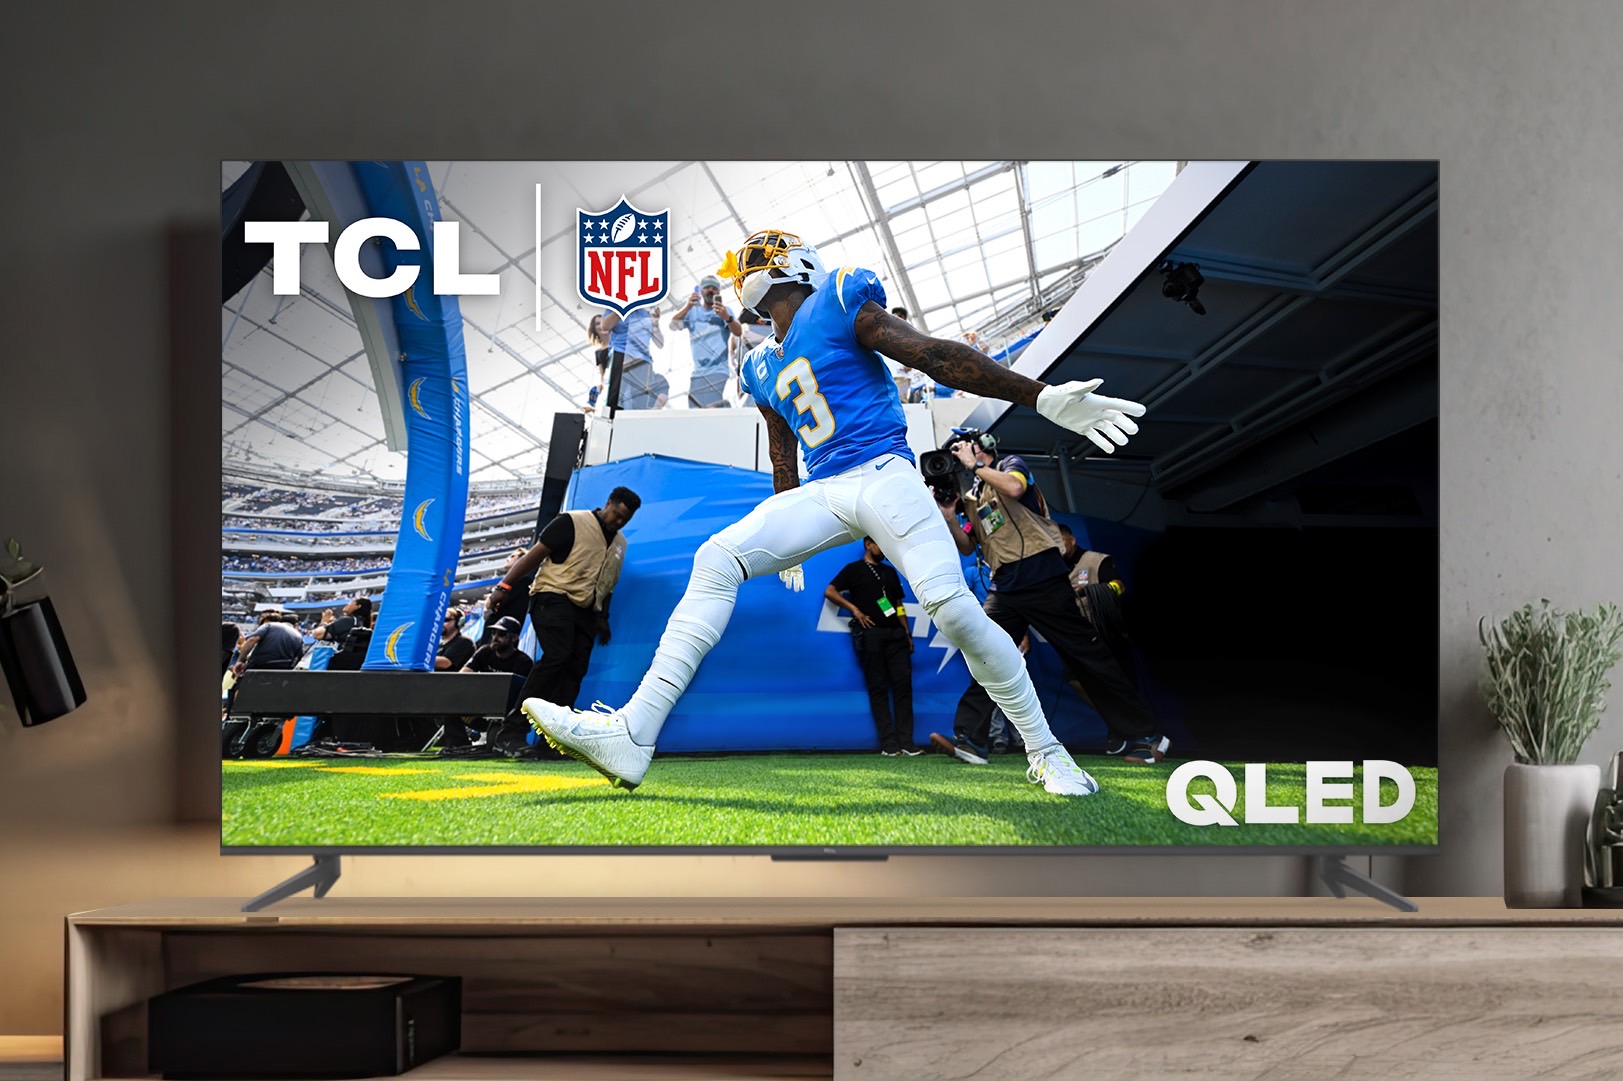 Ends midnight: Get this 50-inch TCL QLED 4K TV for only $270